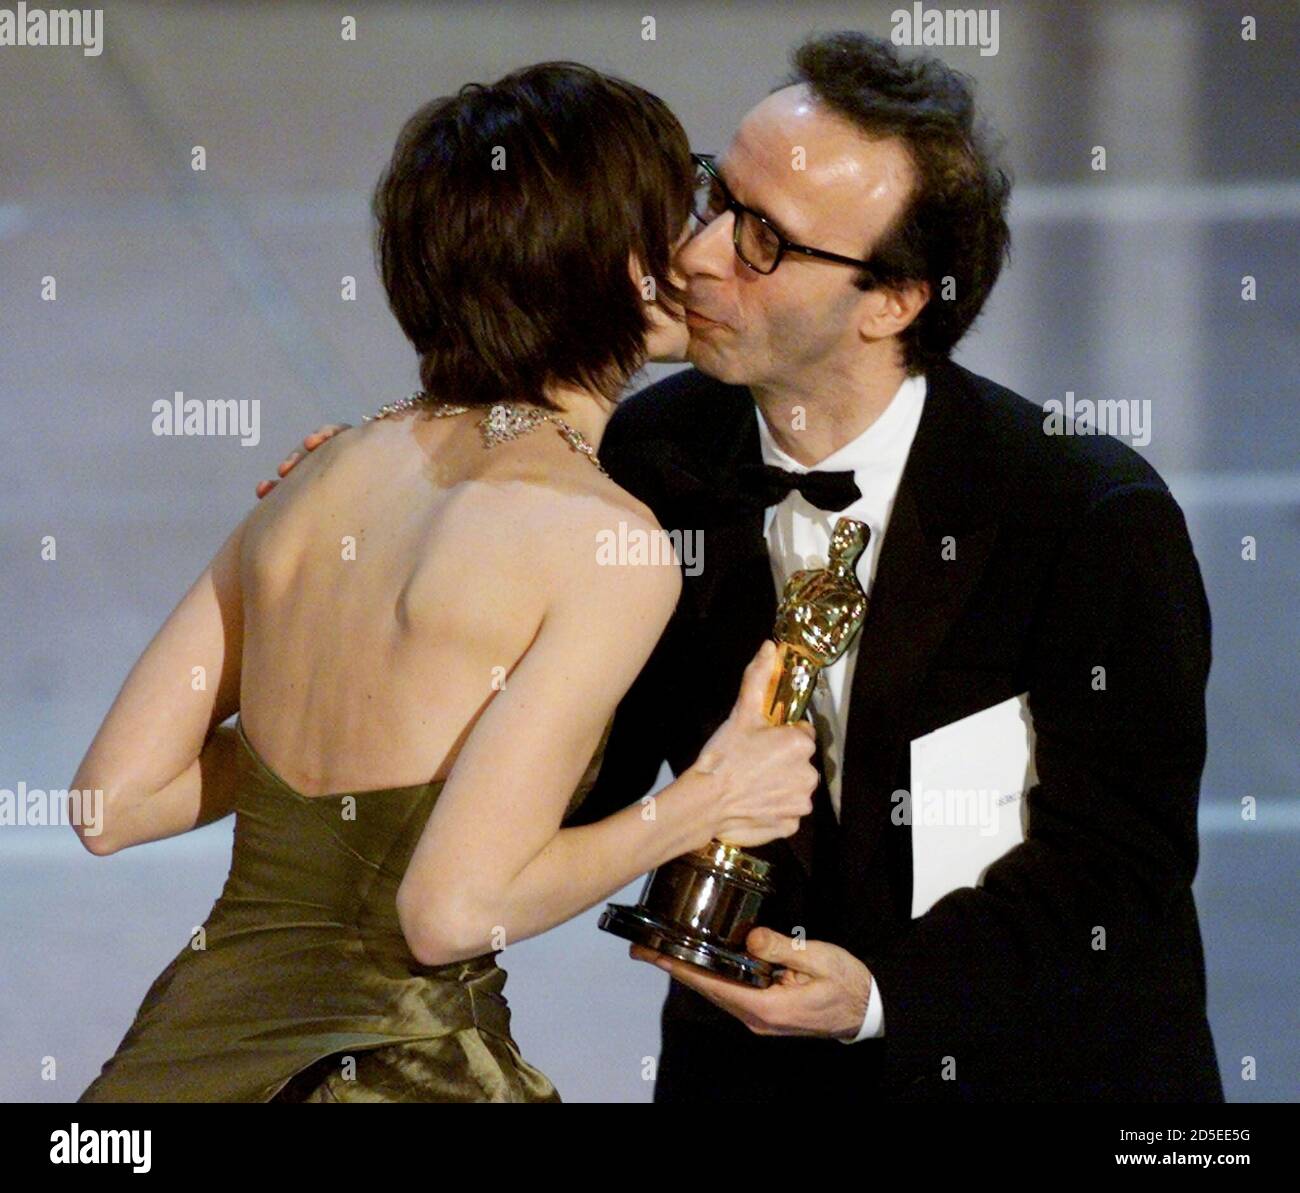 Hillary Swank receives a kiss from presenter Roberto Benigni after winning  the Oscar for Best Actress at the 72nd Annual Academy Awards, March 26.  Swank won for her roll in "Boys Don't